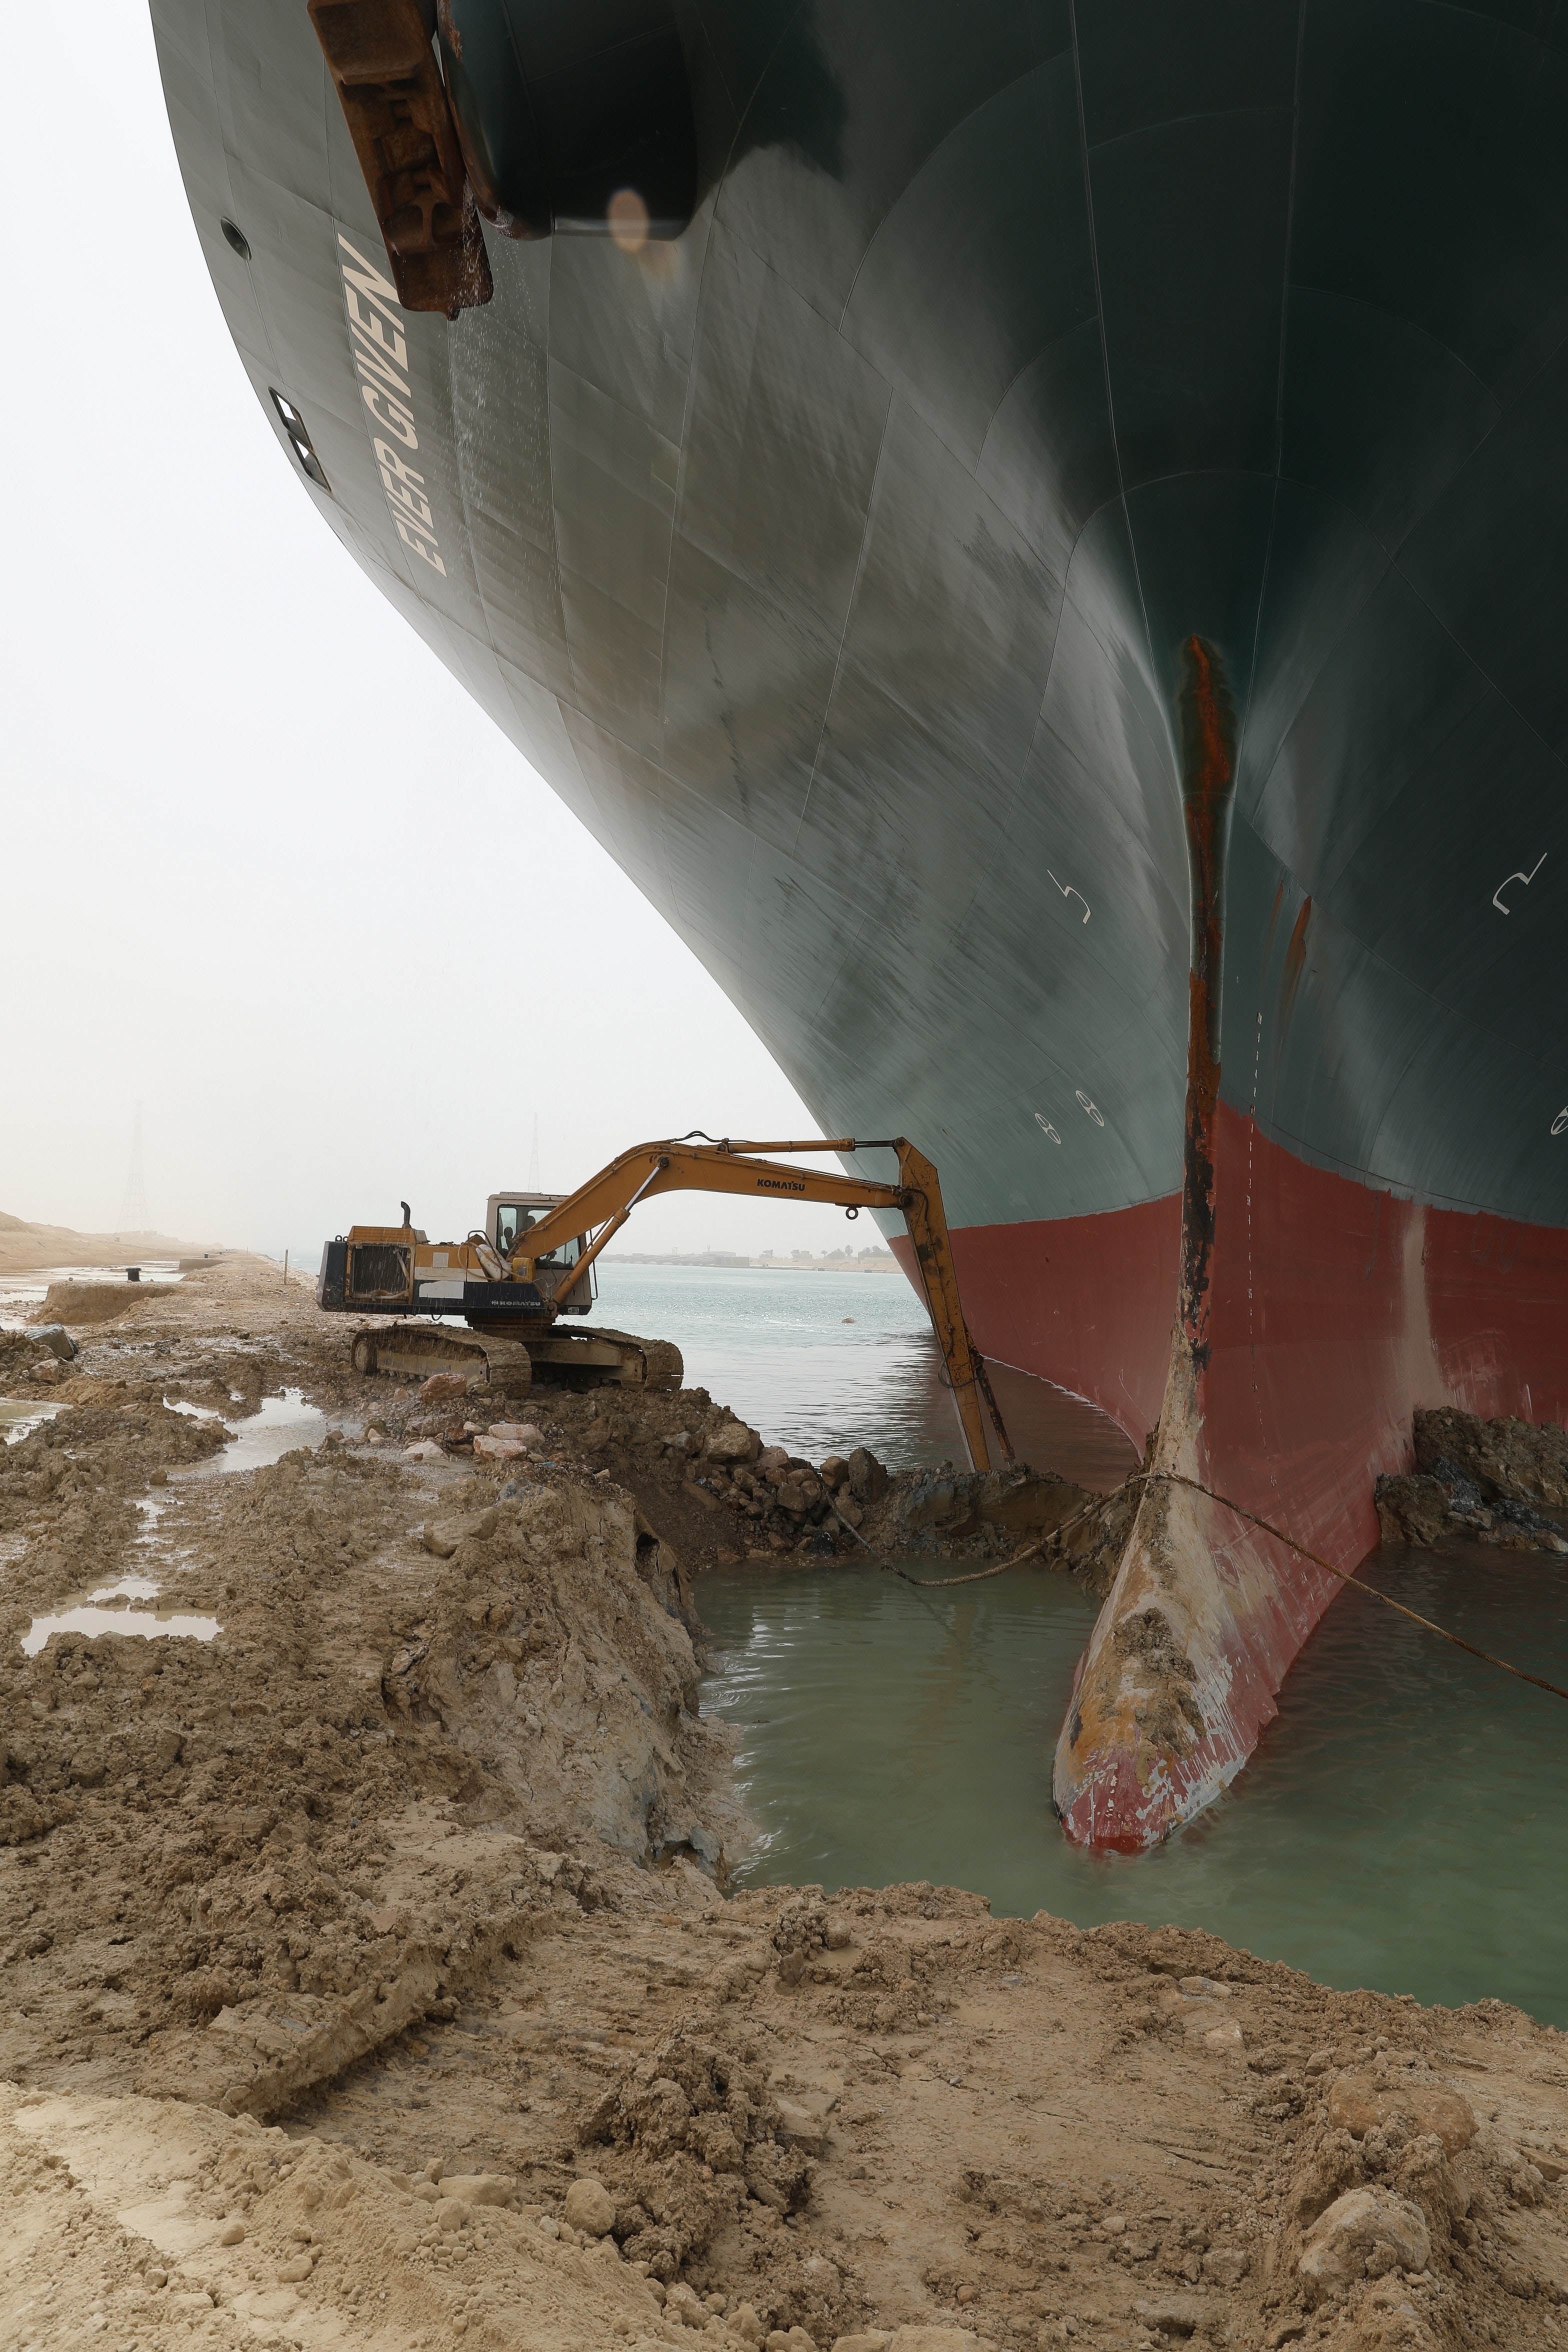 A digger extracting soil at the base of a large ship's hull